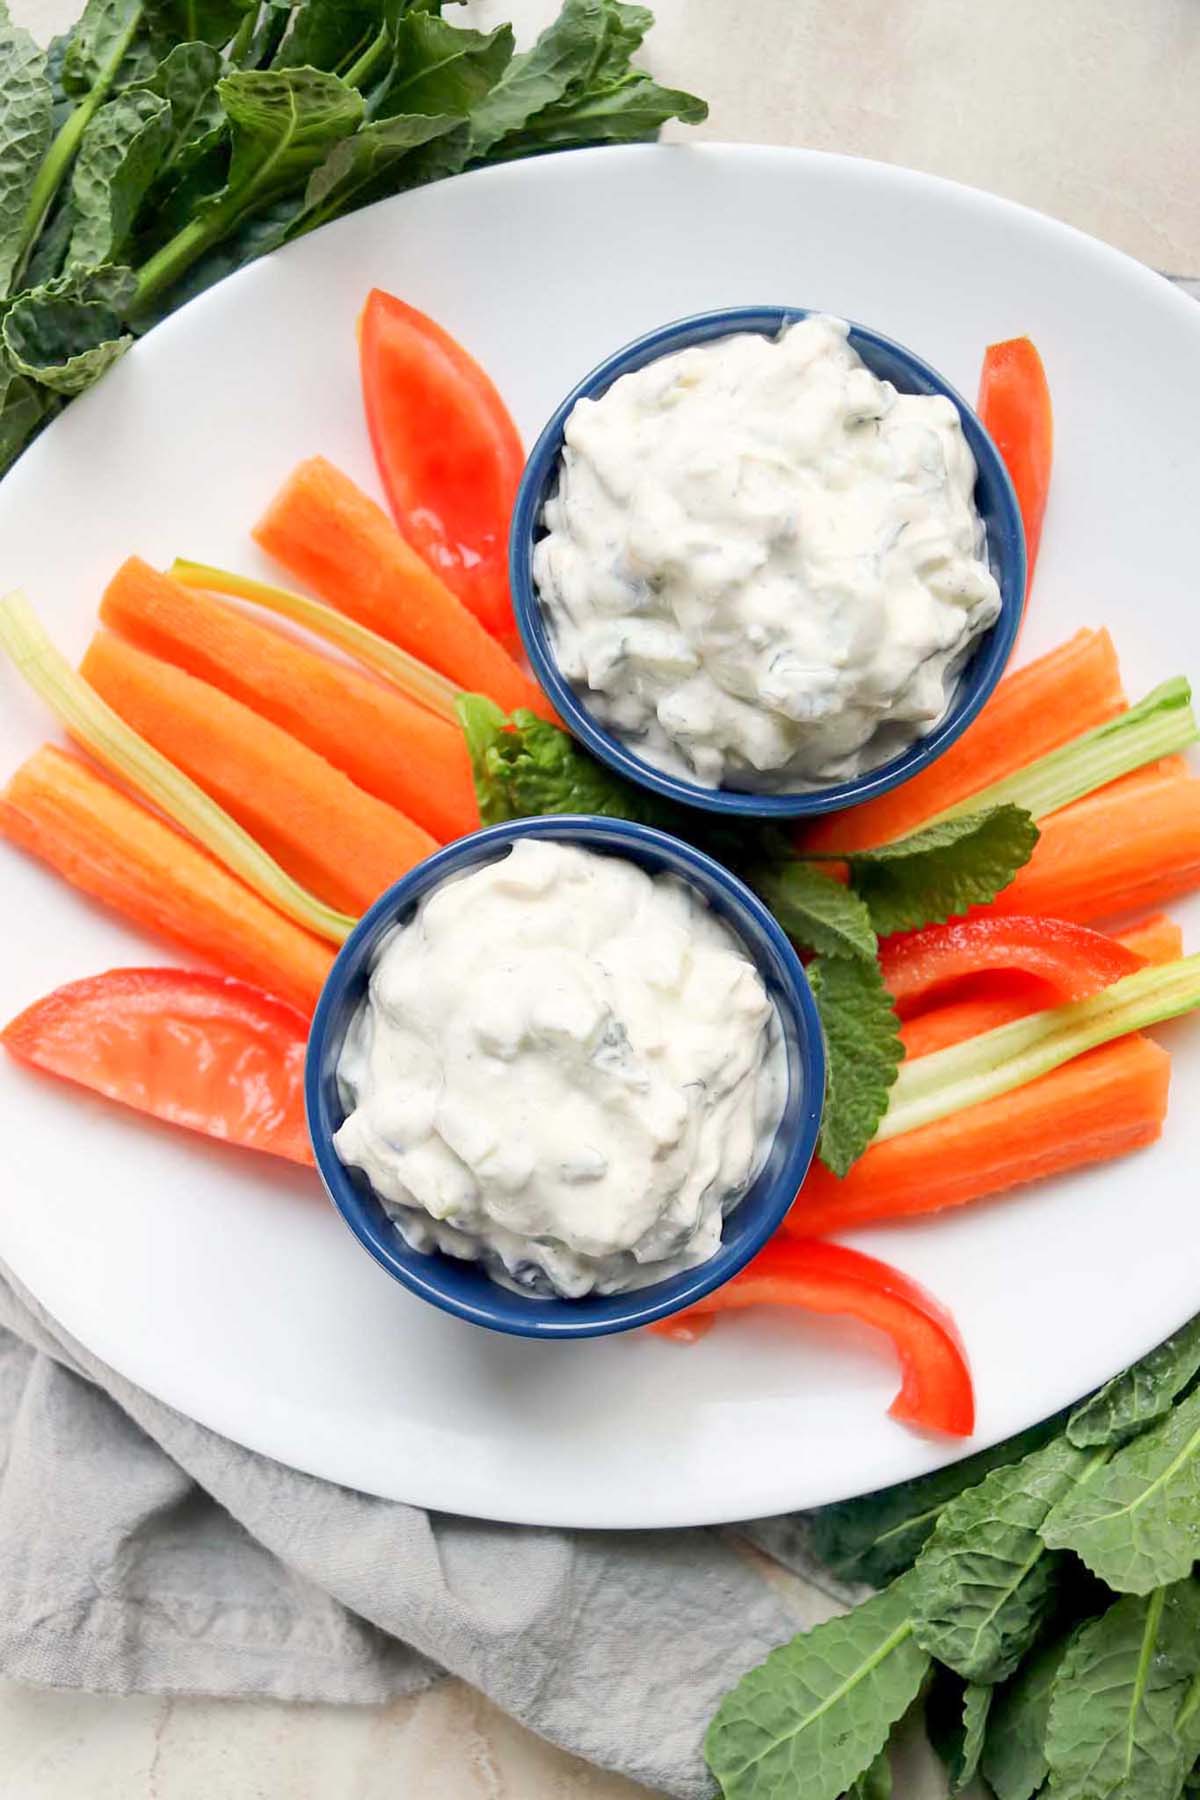 Two cups of dip on a plate with carrots sticks.